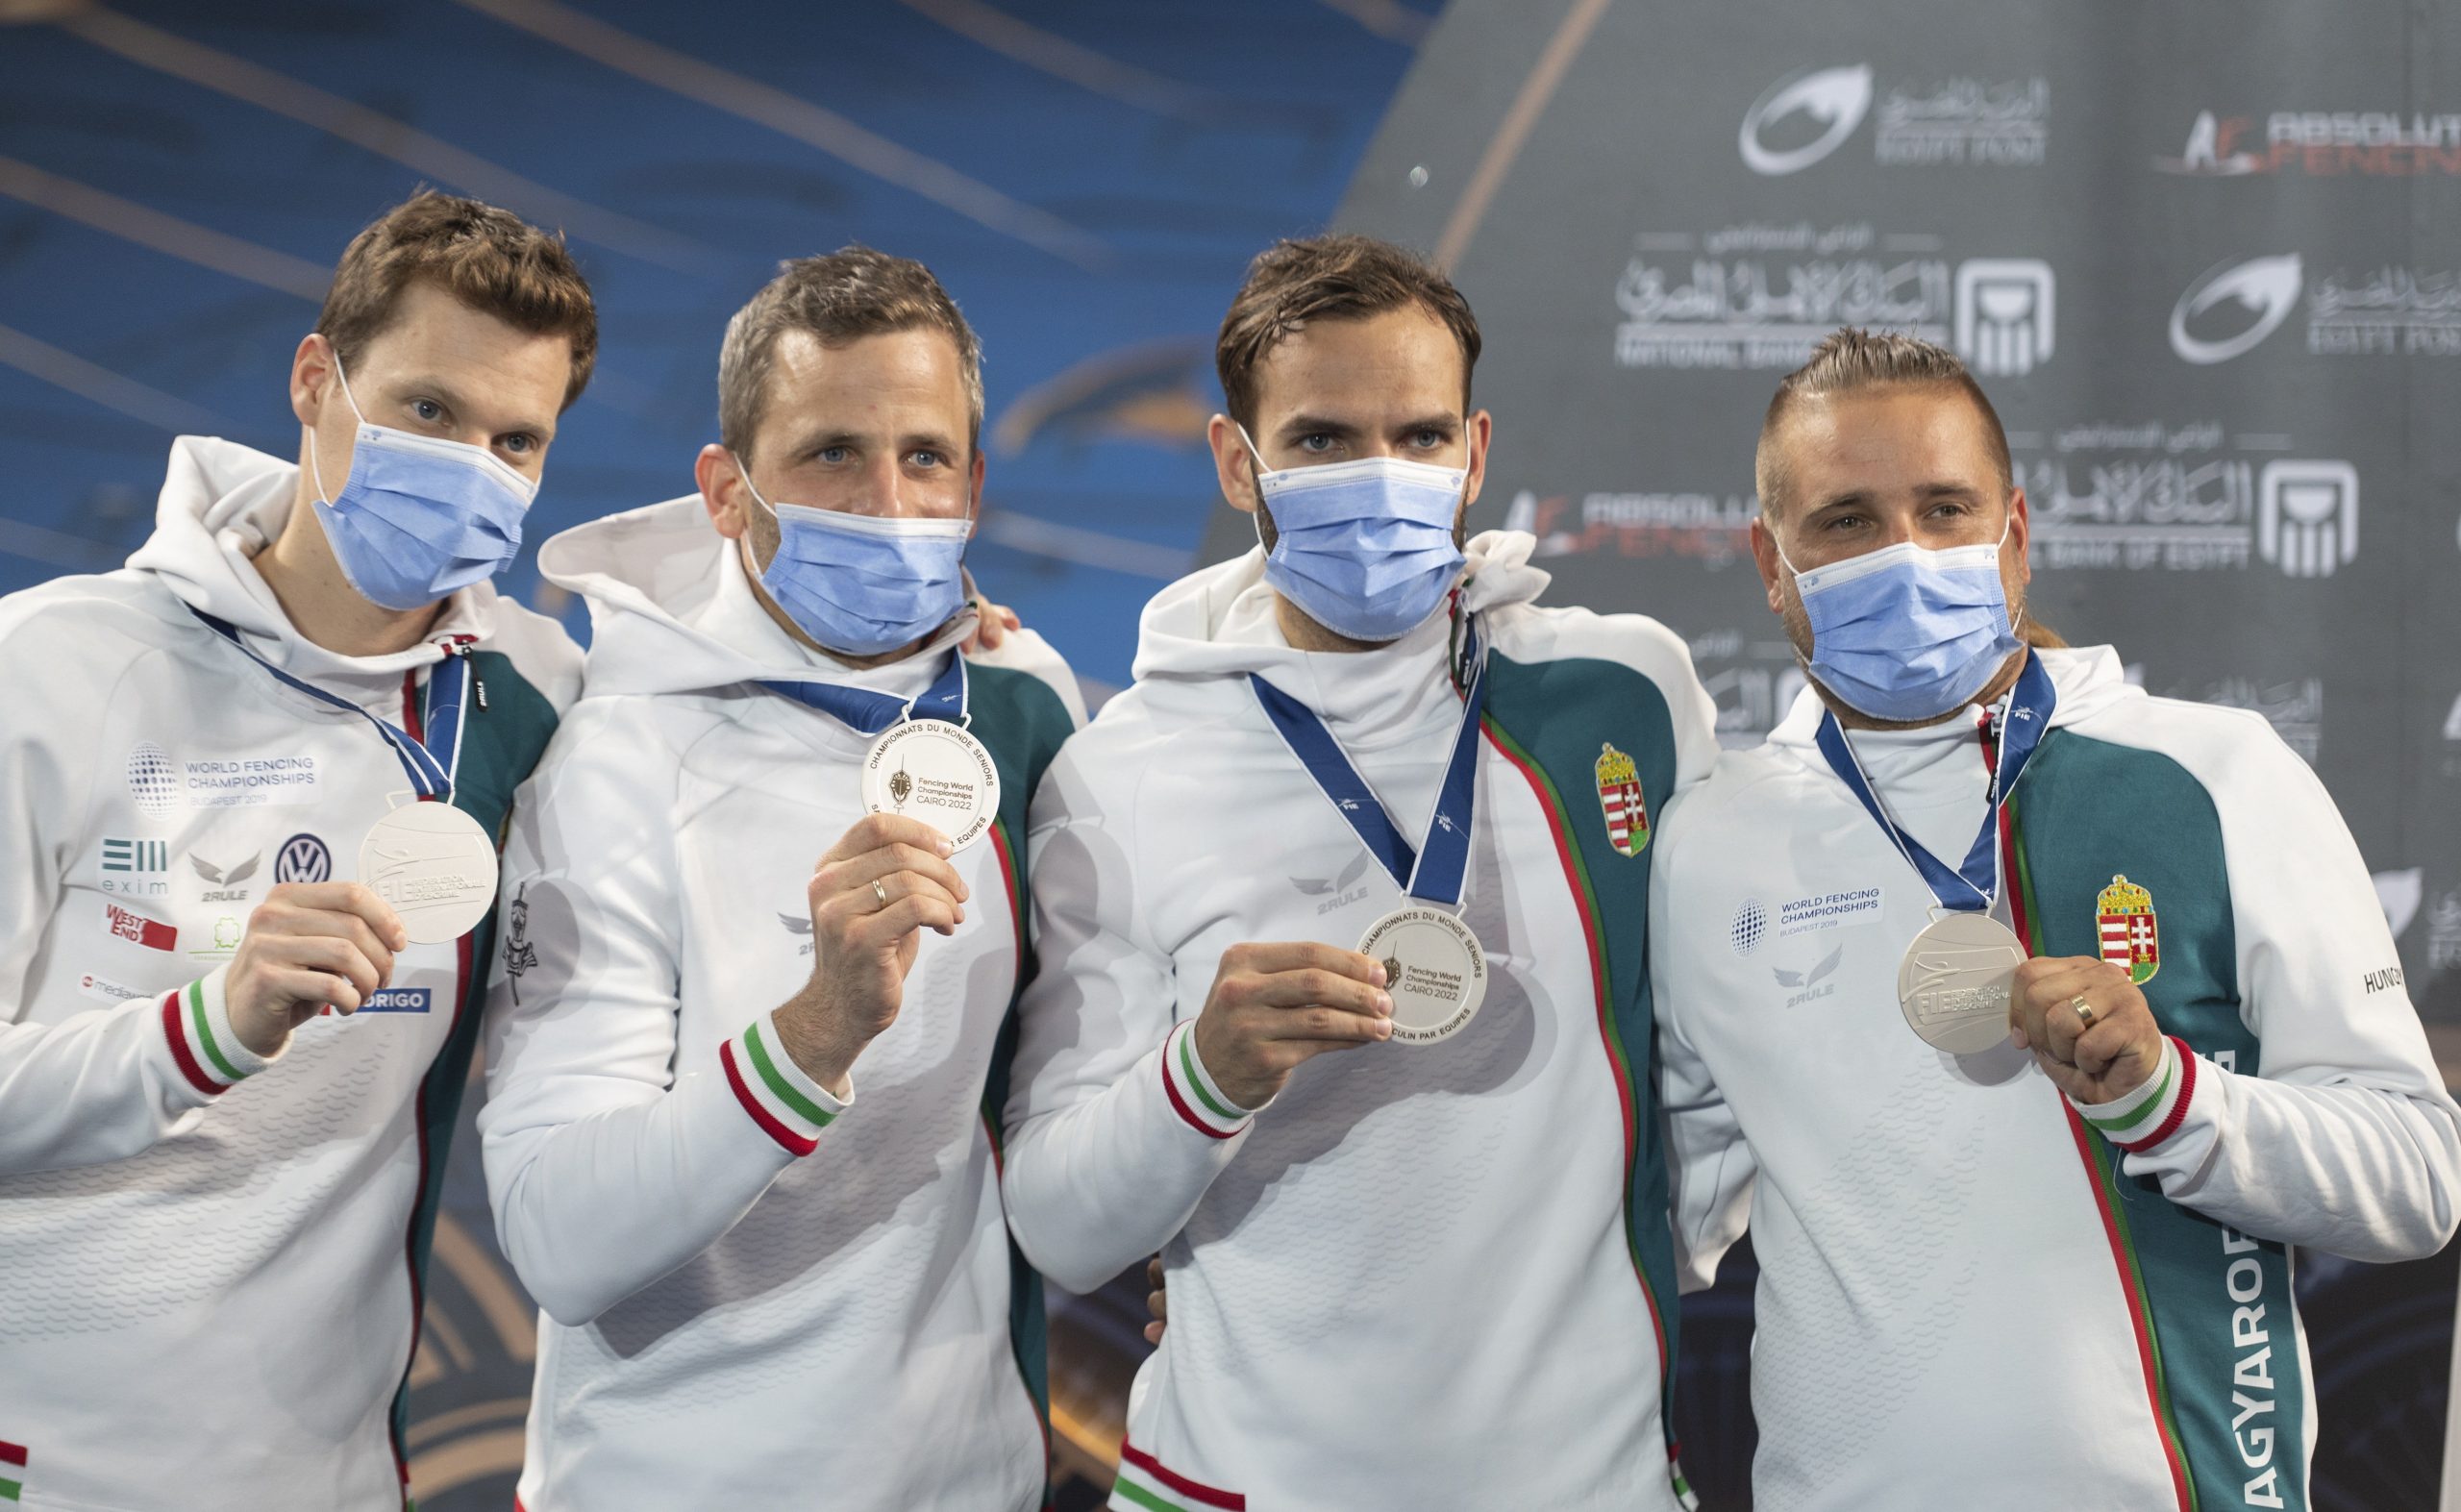 Hungarian Men’s Saber Team Takes Silver at World Fencing Championships